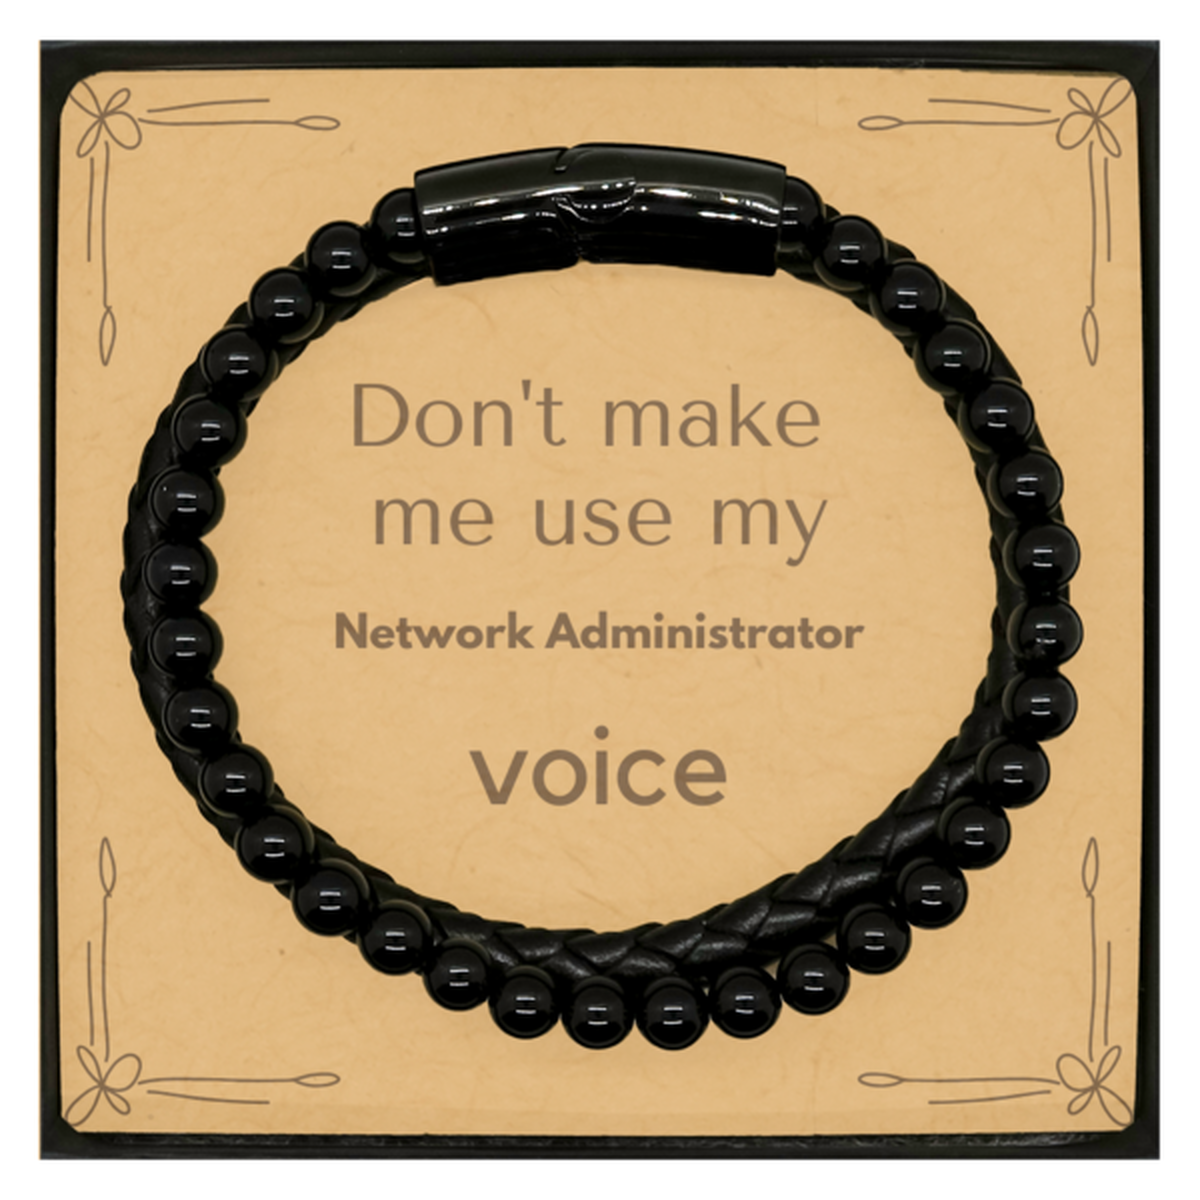 Don't make me use my Network Administrator voice, Sarcasm Network Administrator Card Gifts, Christmas Network Administrator Stone Leather Bracelets Birthday Unique Gifts For Network Administrator Coworkers, Men, Women, Colleague, Friends